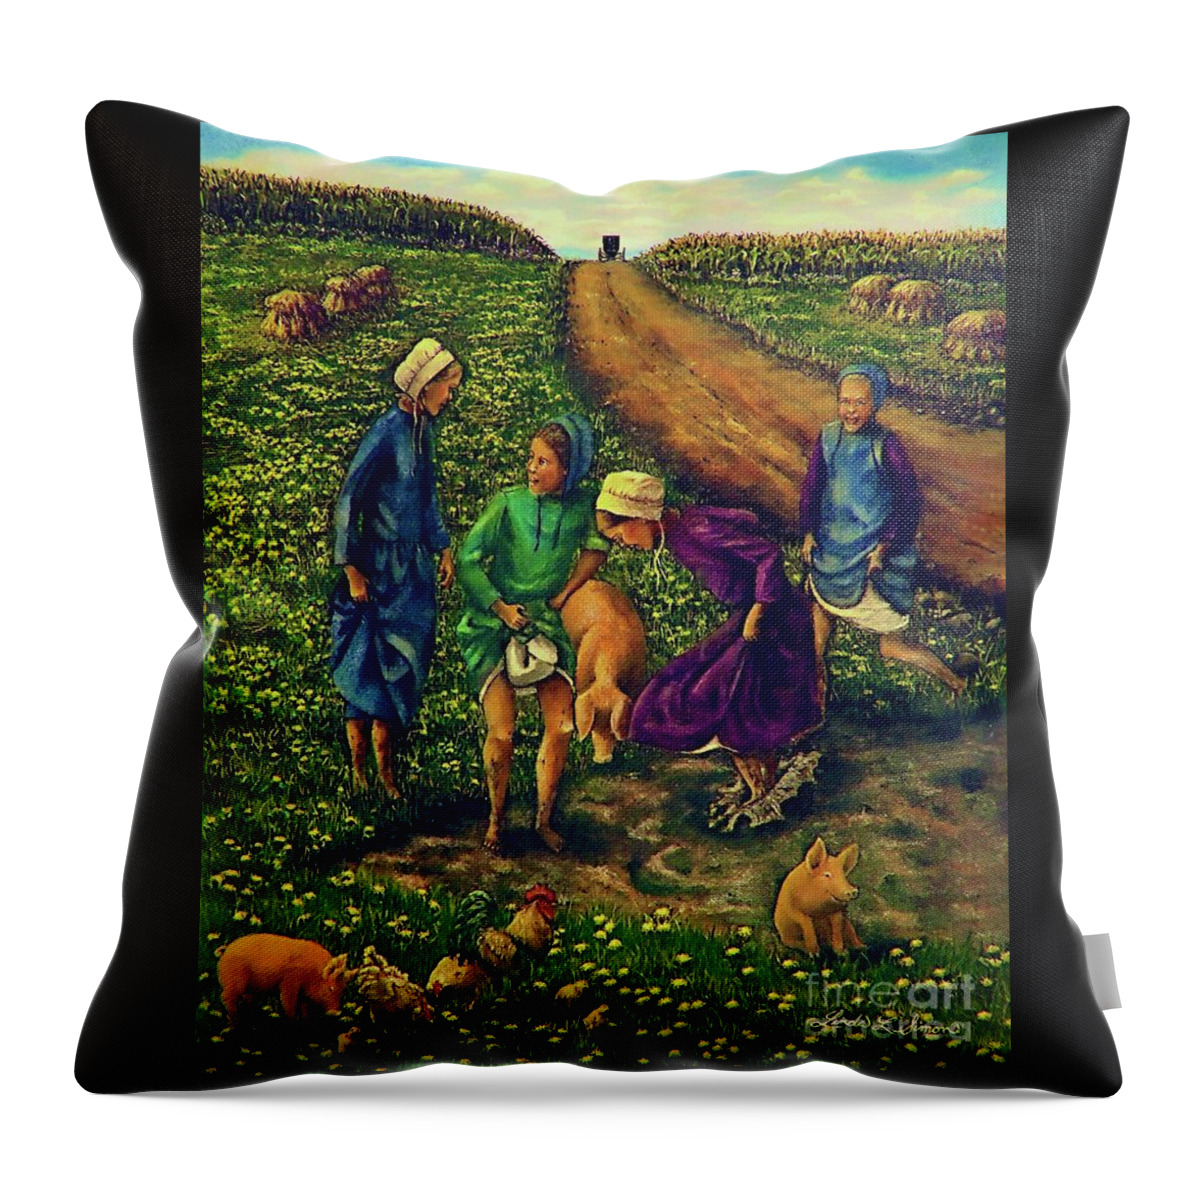 Amish Throw Pillow featuring the painting Dandy Day by Linda Simon